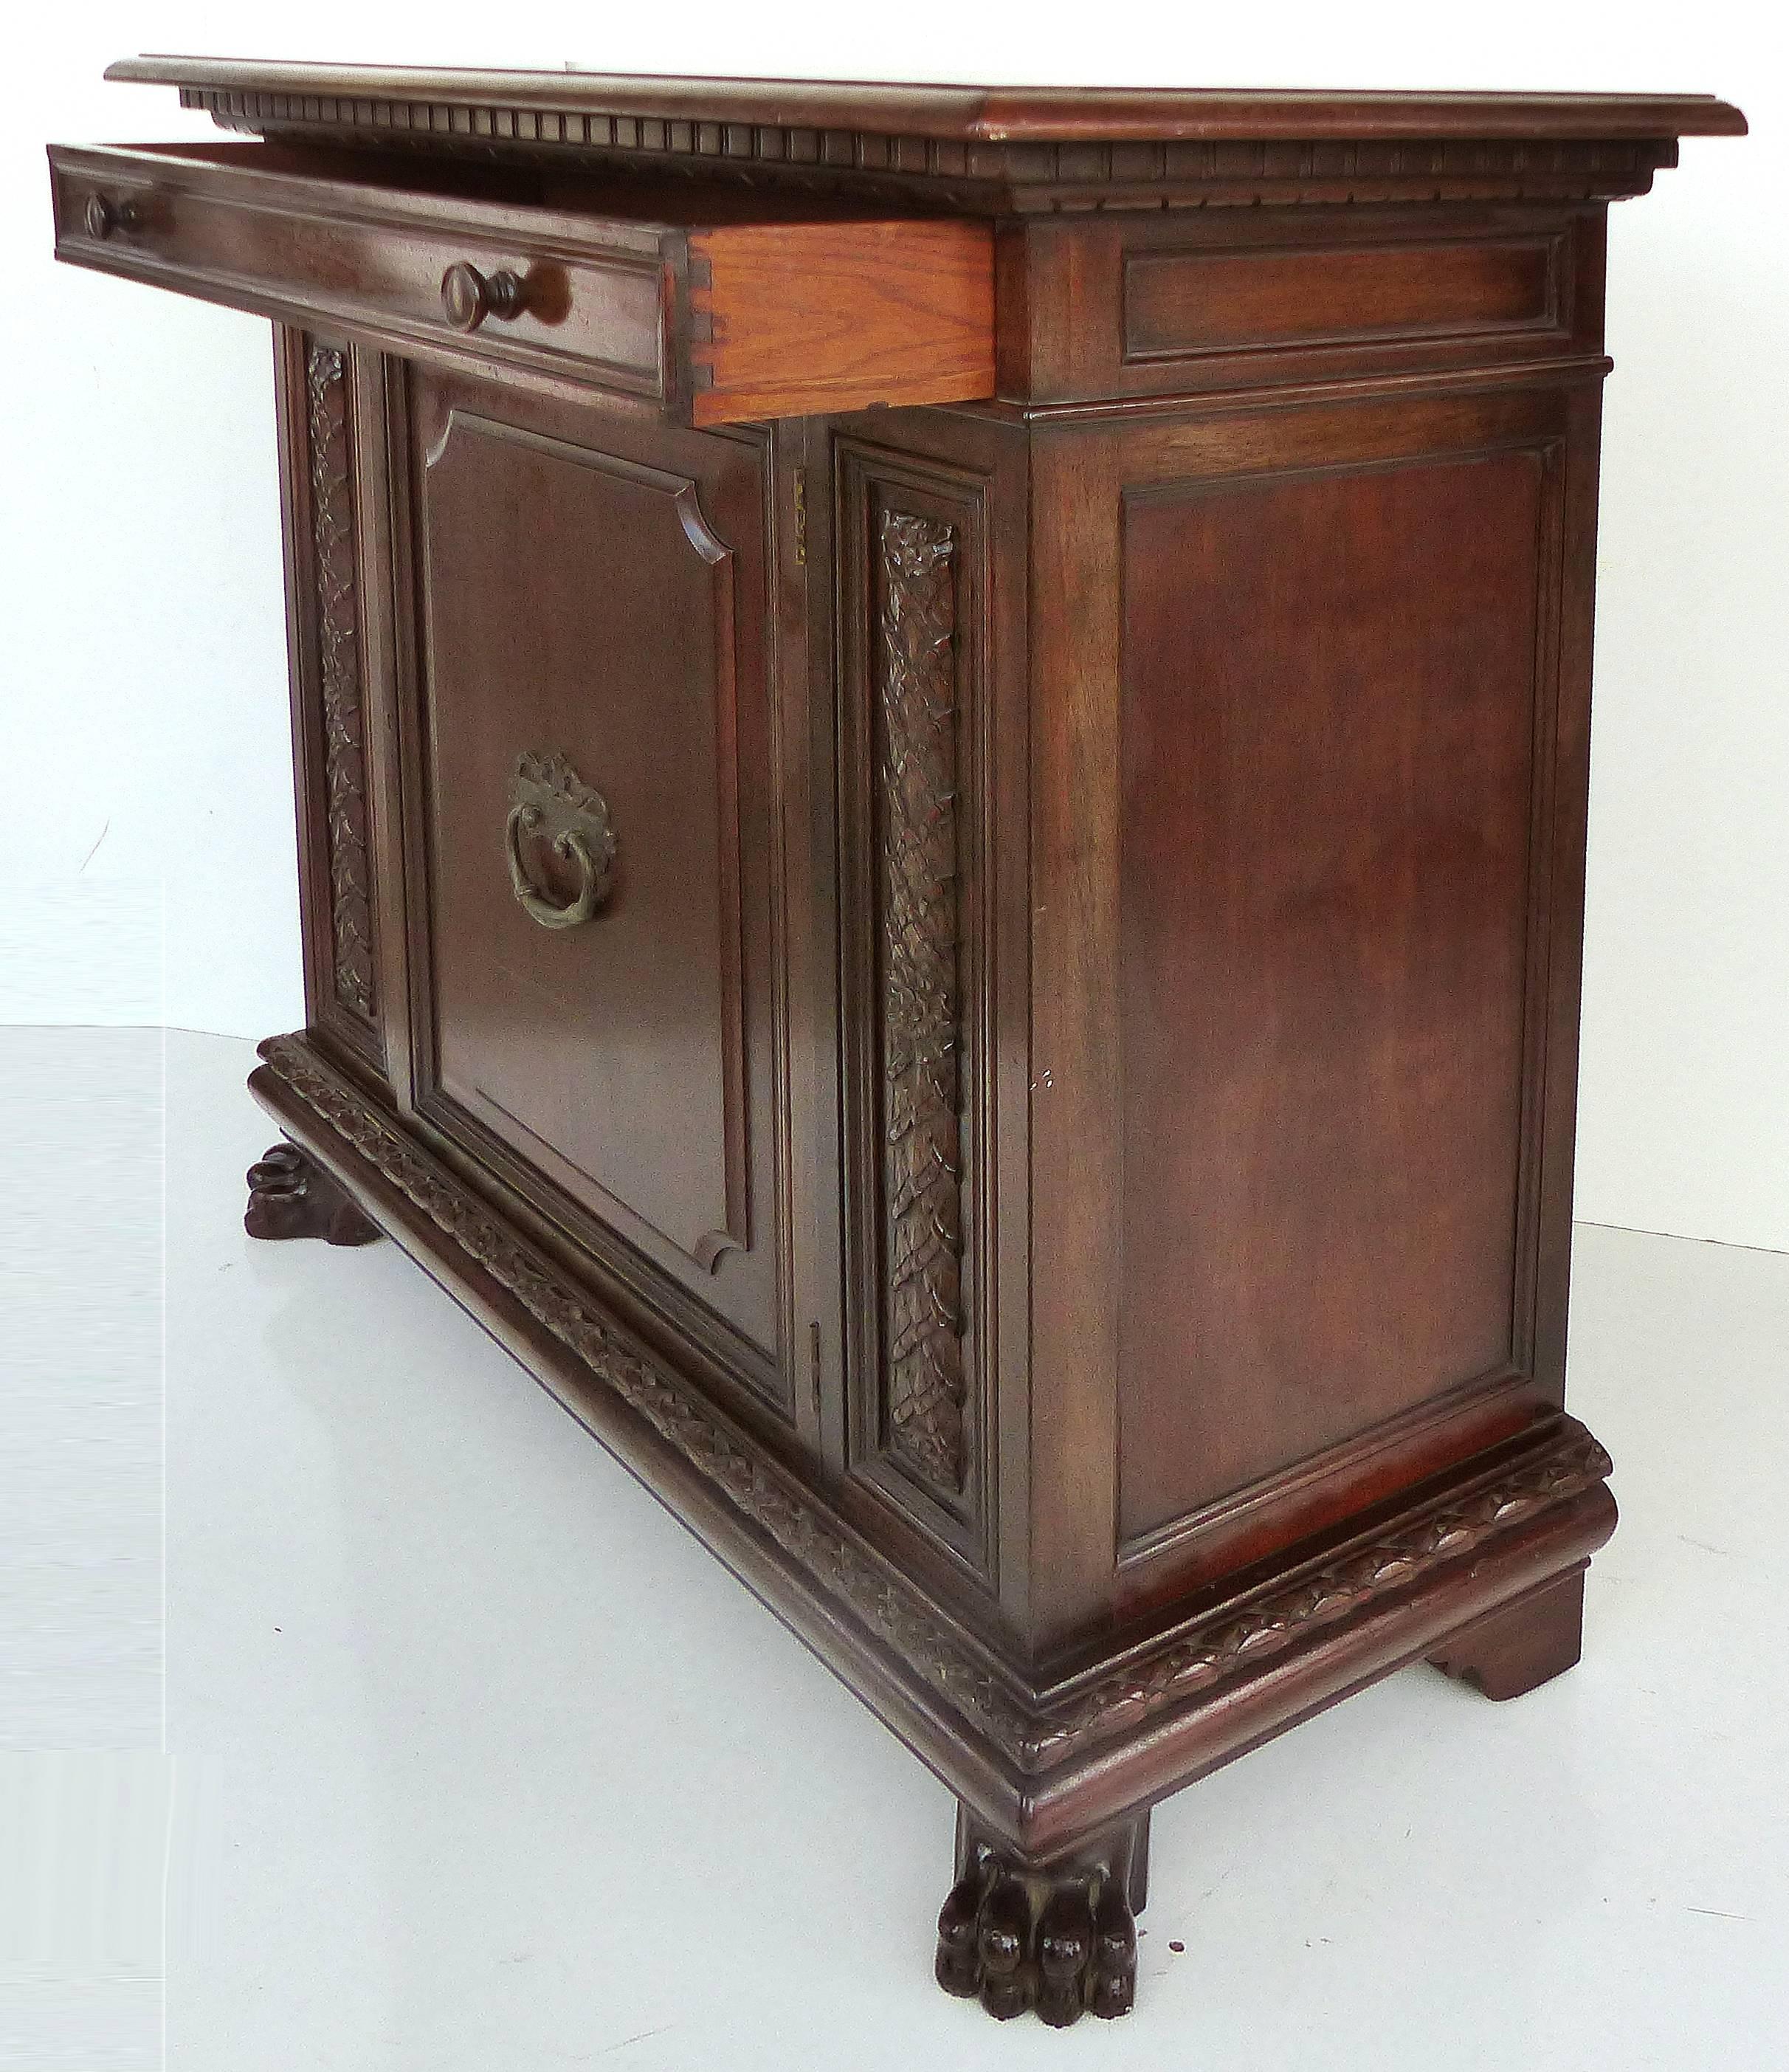 Renaissance Revival Mahogany Cabinet with Drawer, circa 1920

Offered is an American solid mahogany renaissance revival cabinet, circa 1920 with one drawer with nice dovetailing and two knob handles above a door which opens to reveal two open